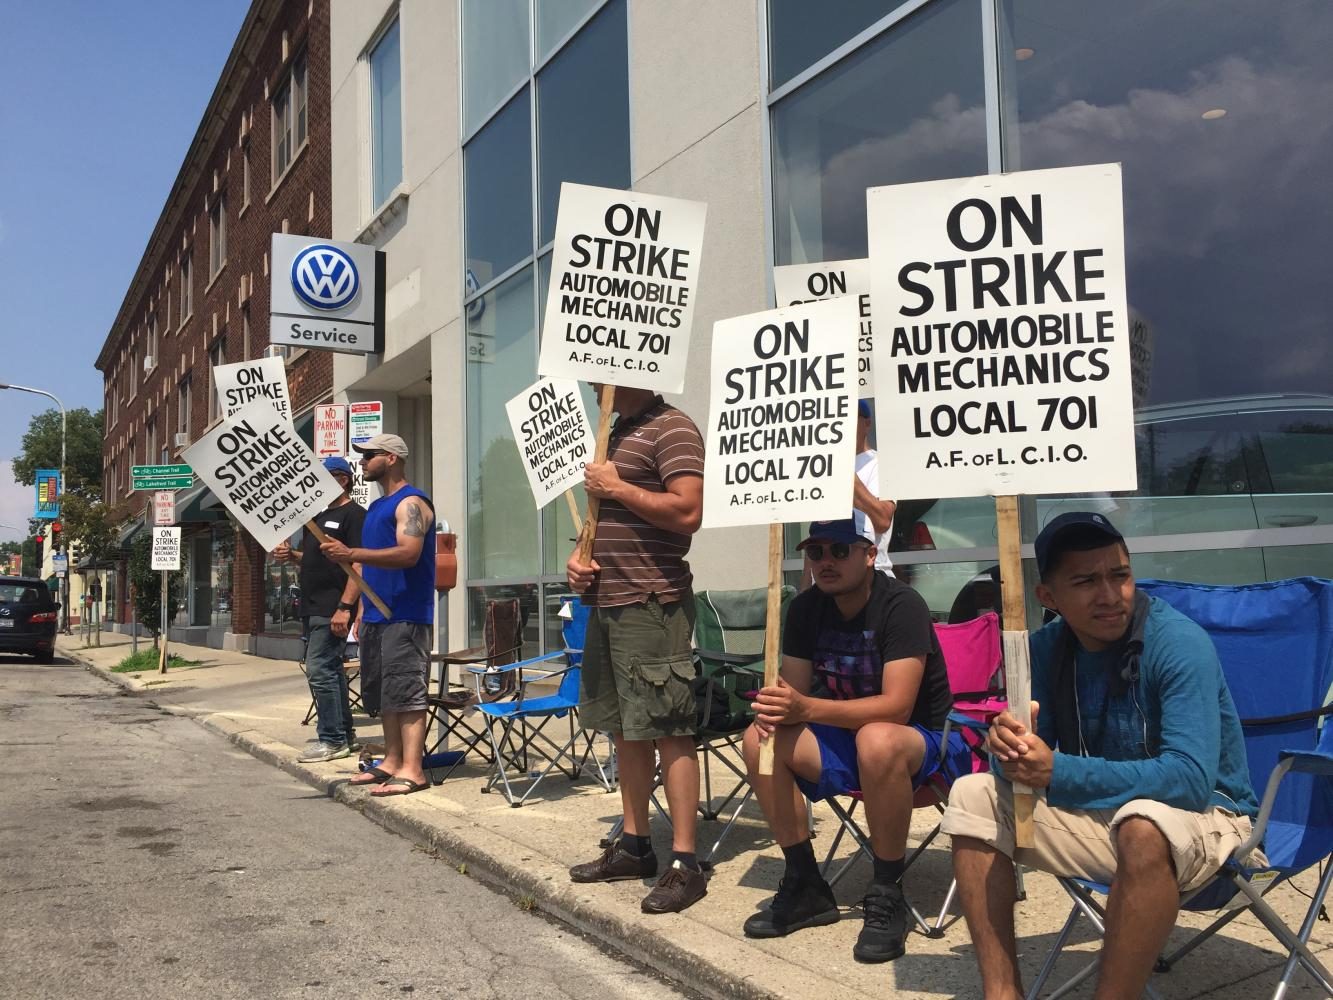 Auto mechanics on strike outside the Autobahn Volkswagen in Evanston. The mechanics are among 2,000 striking throughout the Chicago area.